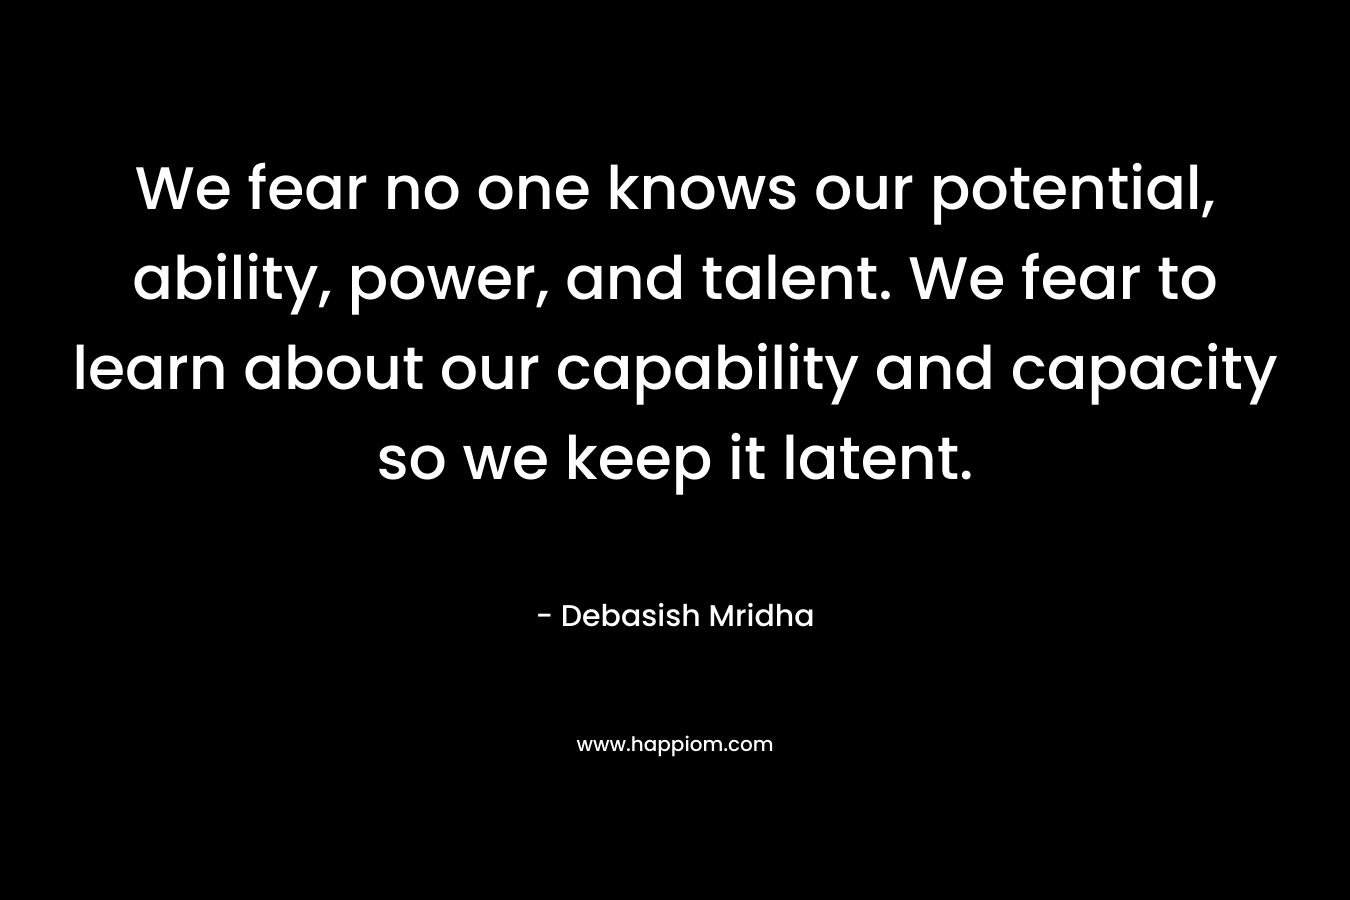 We fear no one knows our potential, ability, power, and talent. We fear to learn about our capability and capacity so we keep it latent.